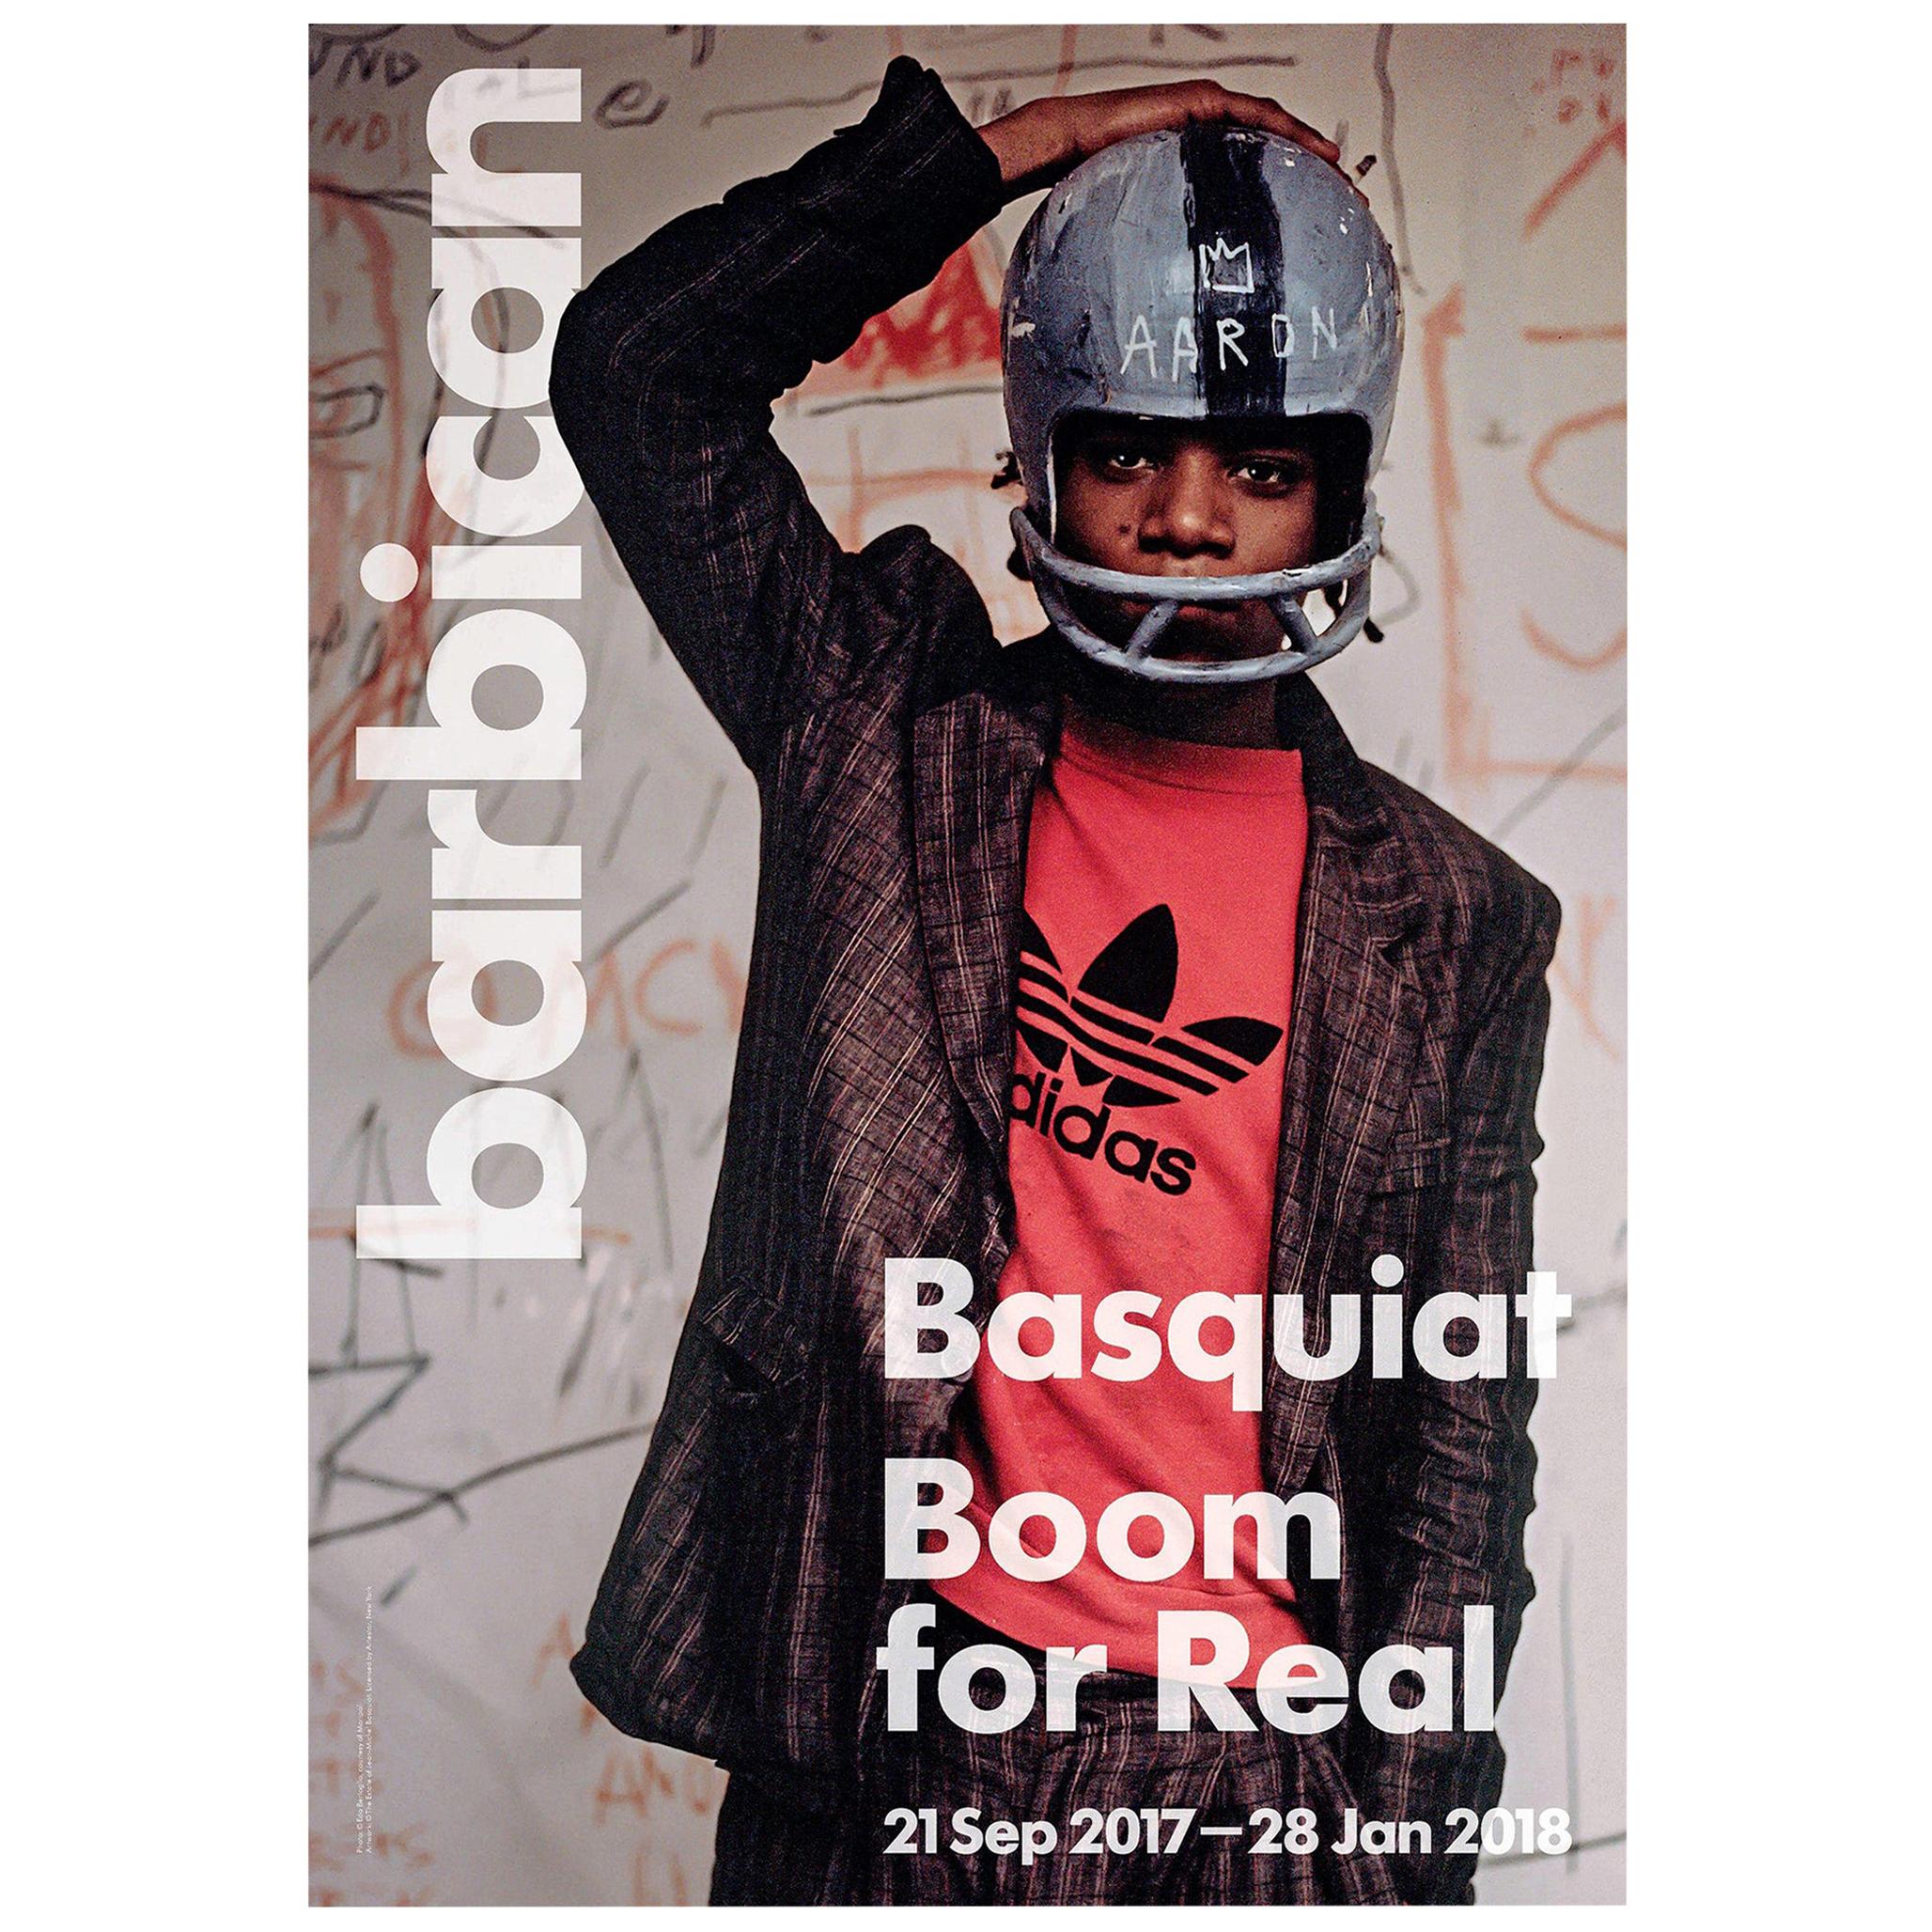 Basquiat Boom for Real Exhibition Poster, London